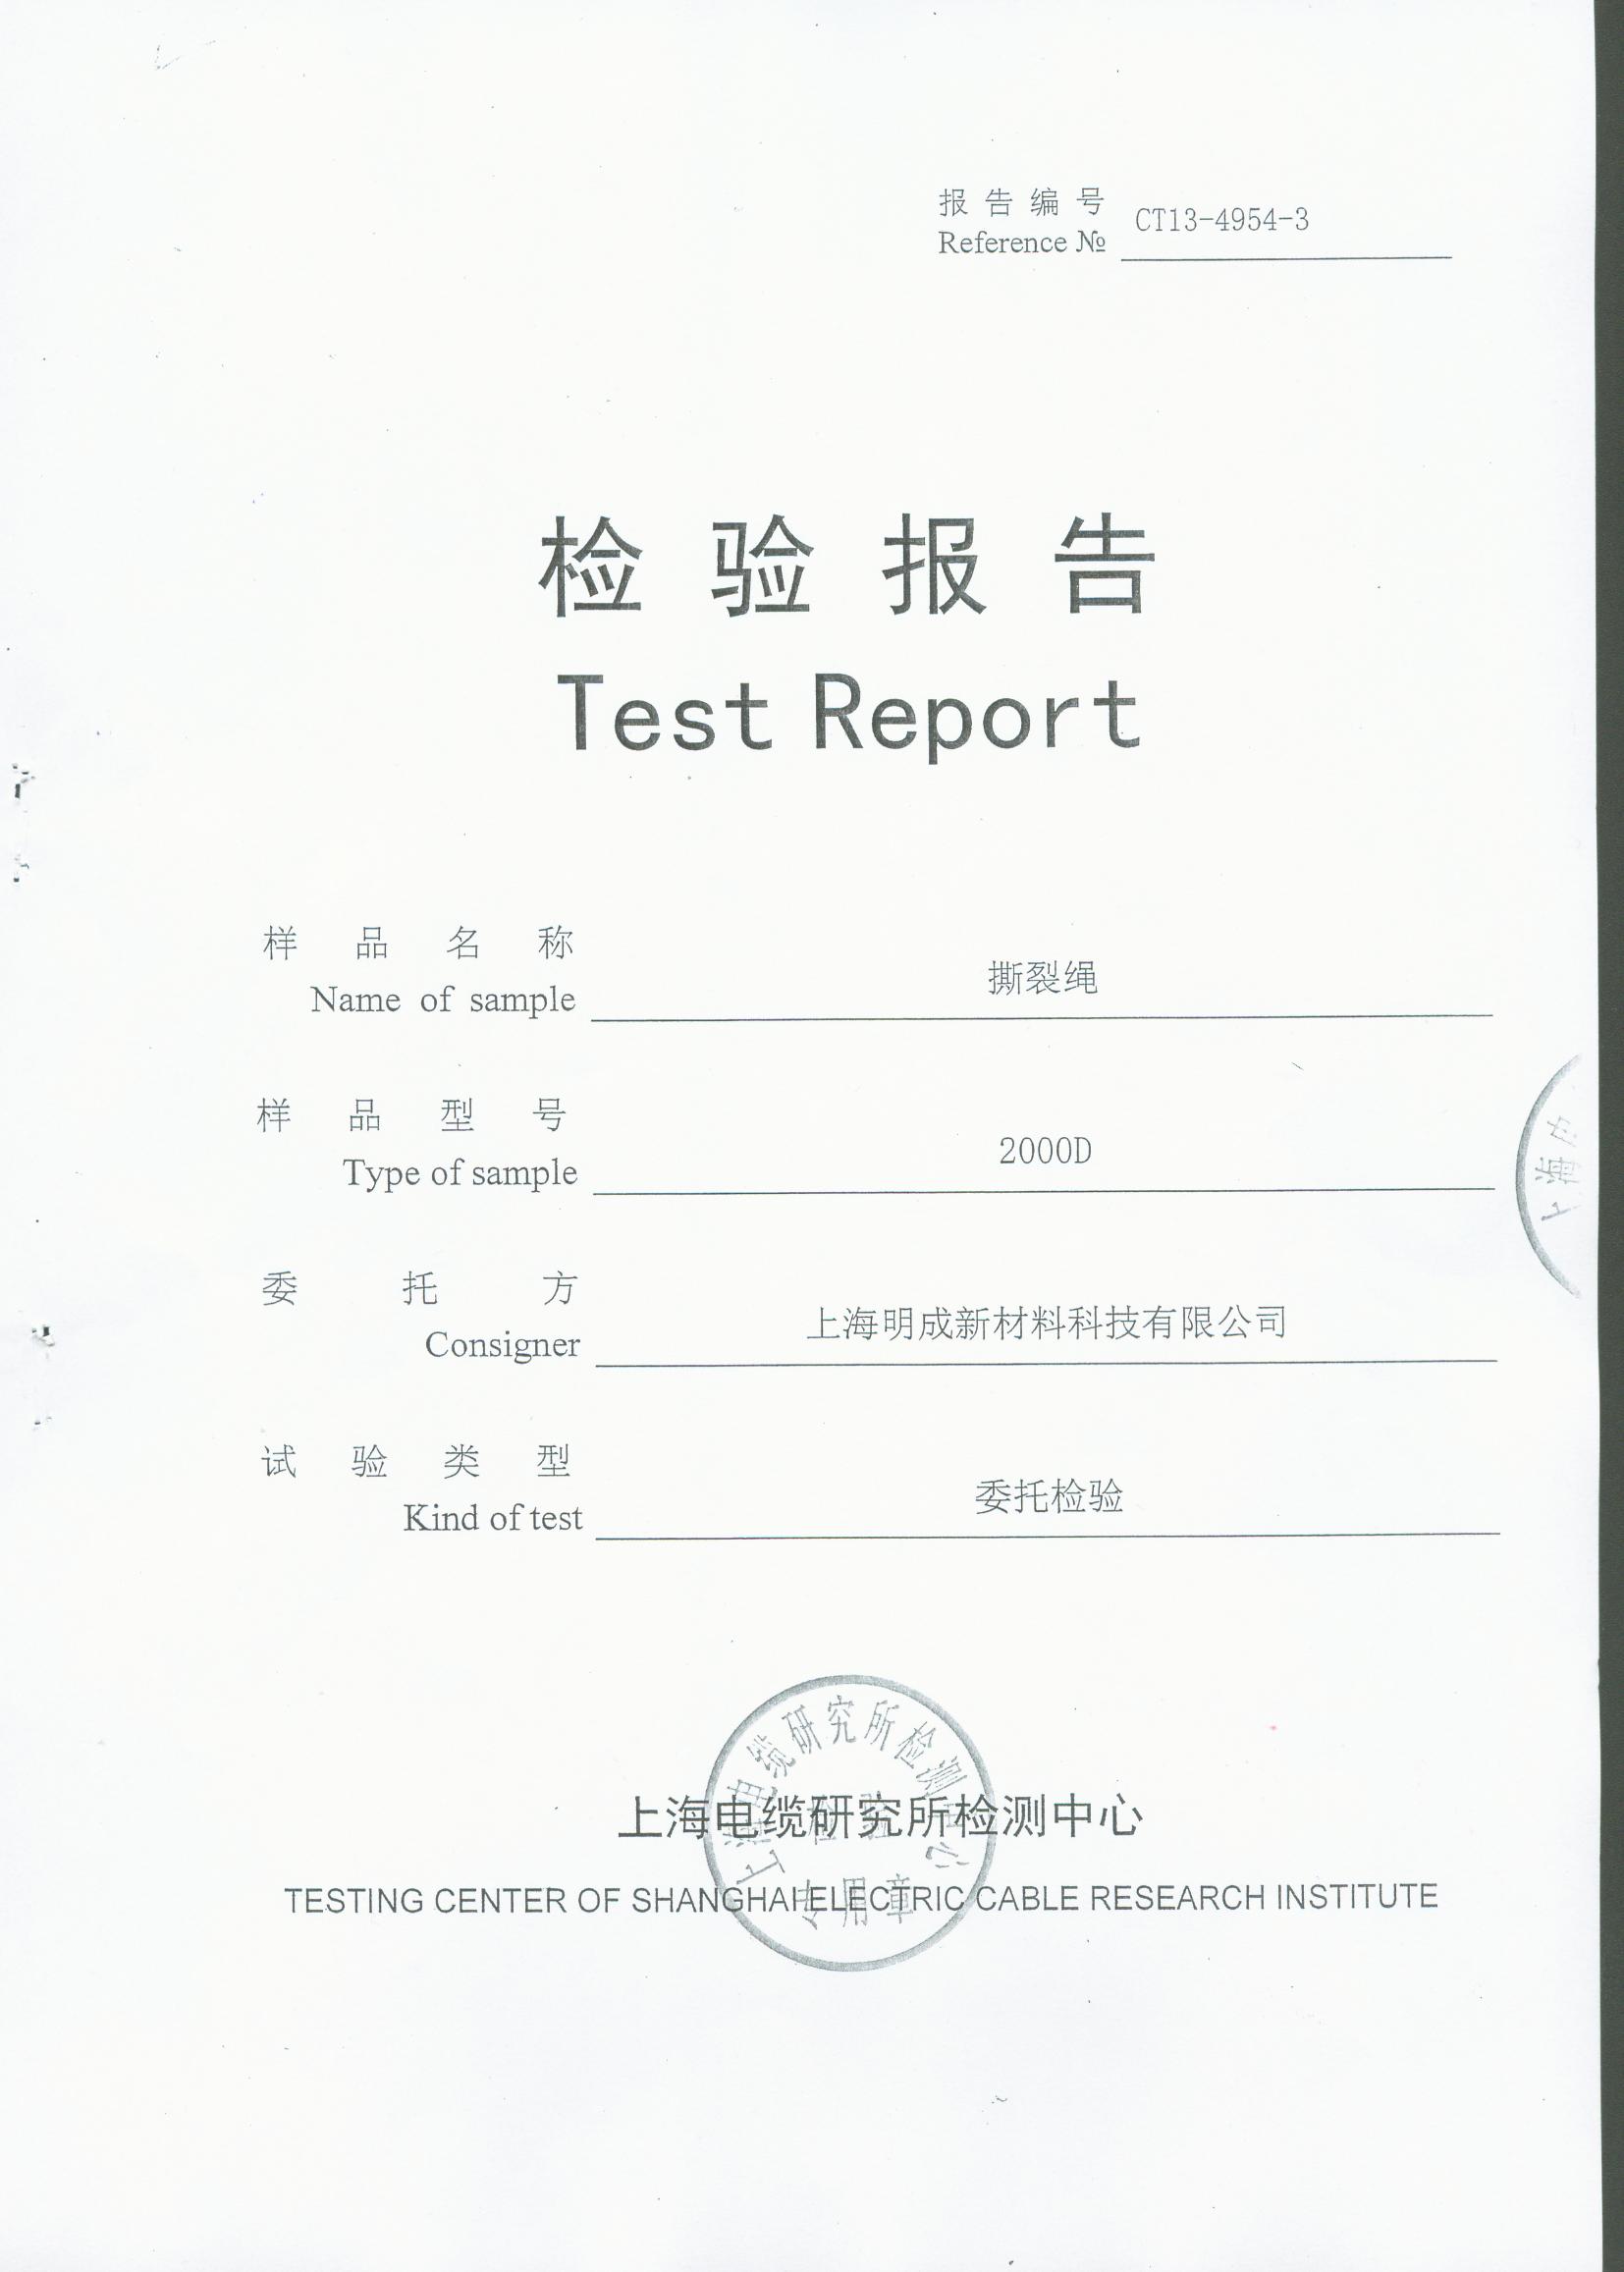 Summary Test Report of Ripcord Test